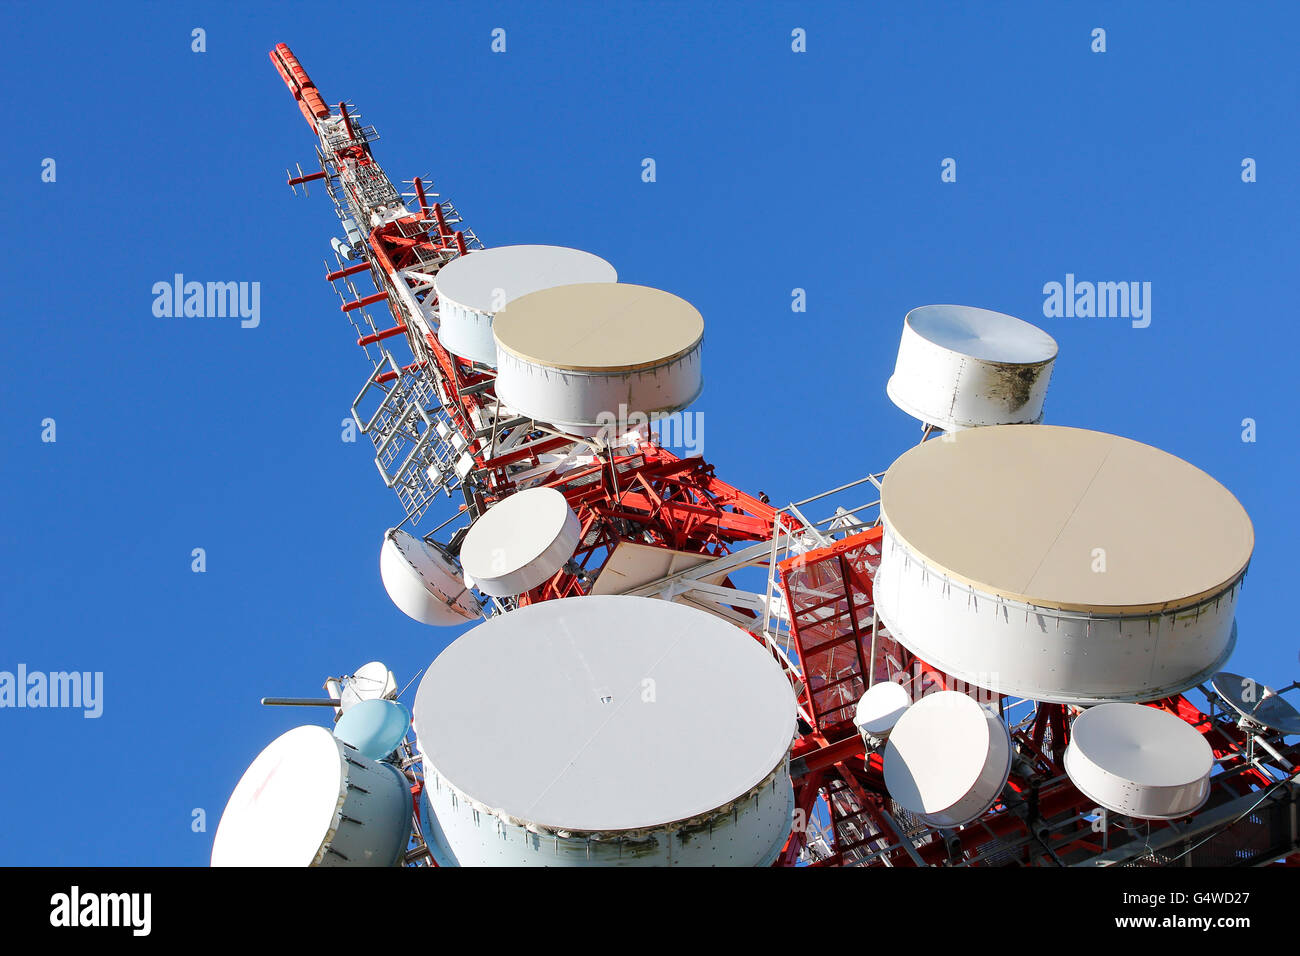 Telecommunications tower against blue sky Stock Photo